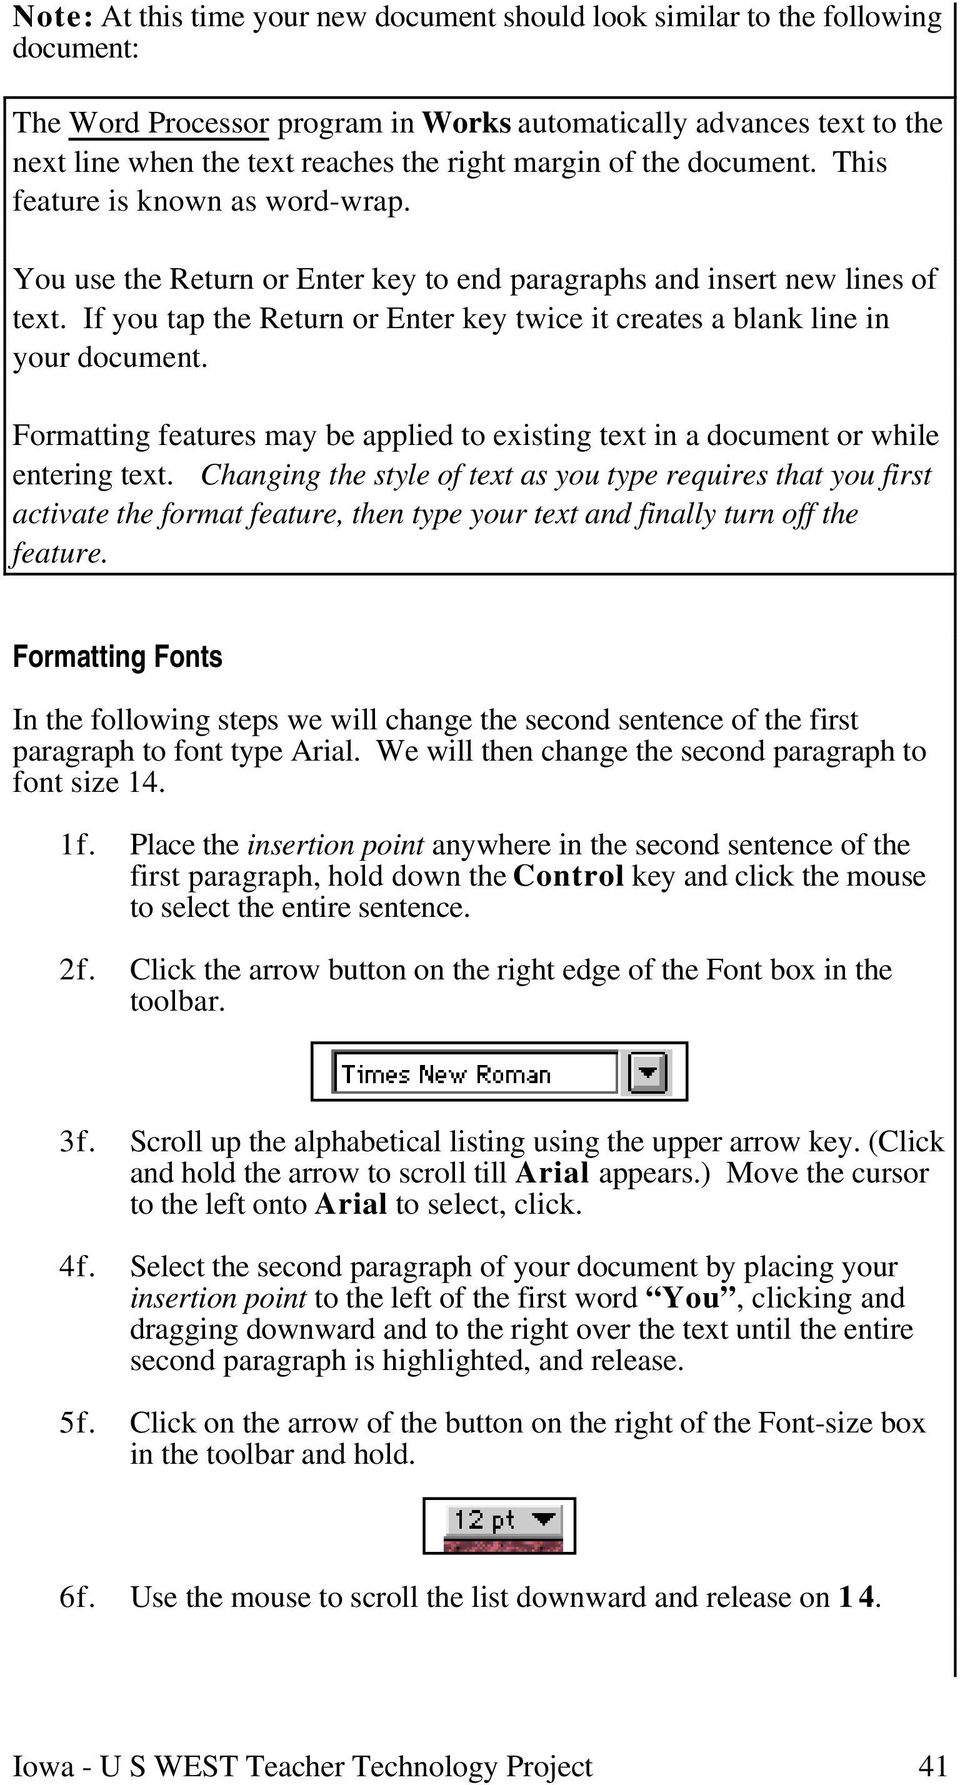 If you tap the Return or Enter key twice it creates a blank line in your document. Formatting features may be applied to existing text in a document or while entering text.